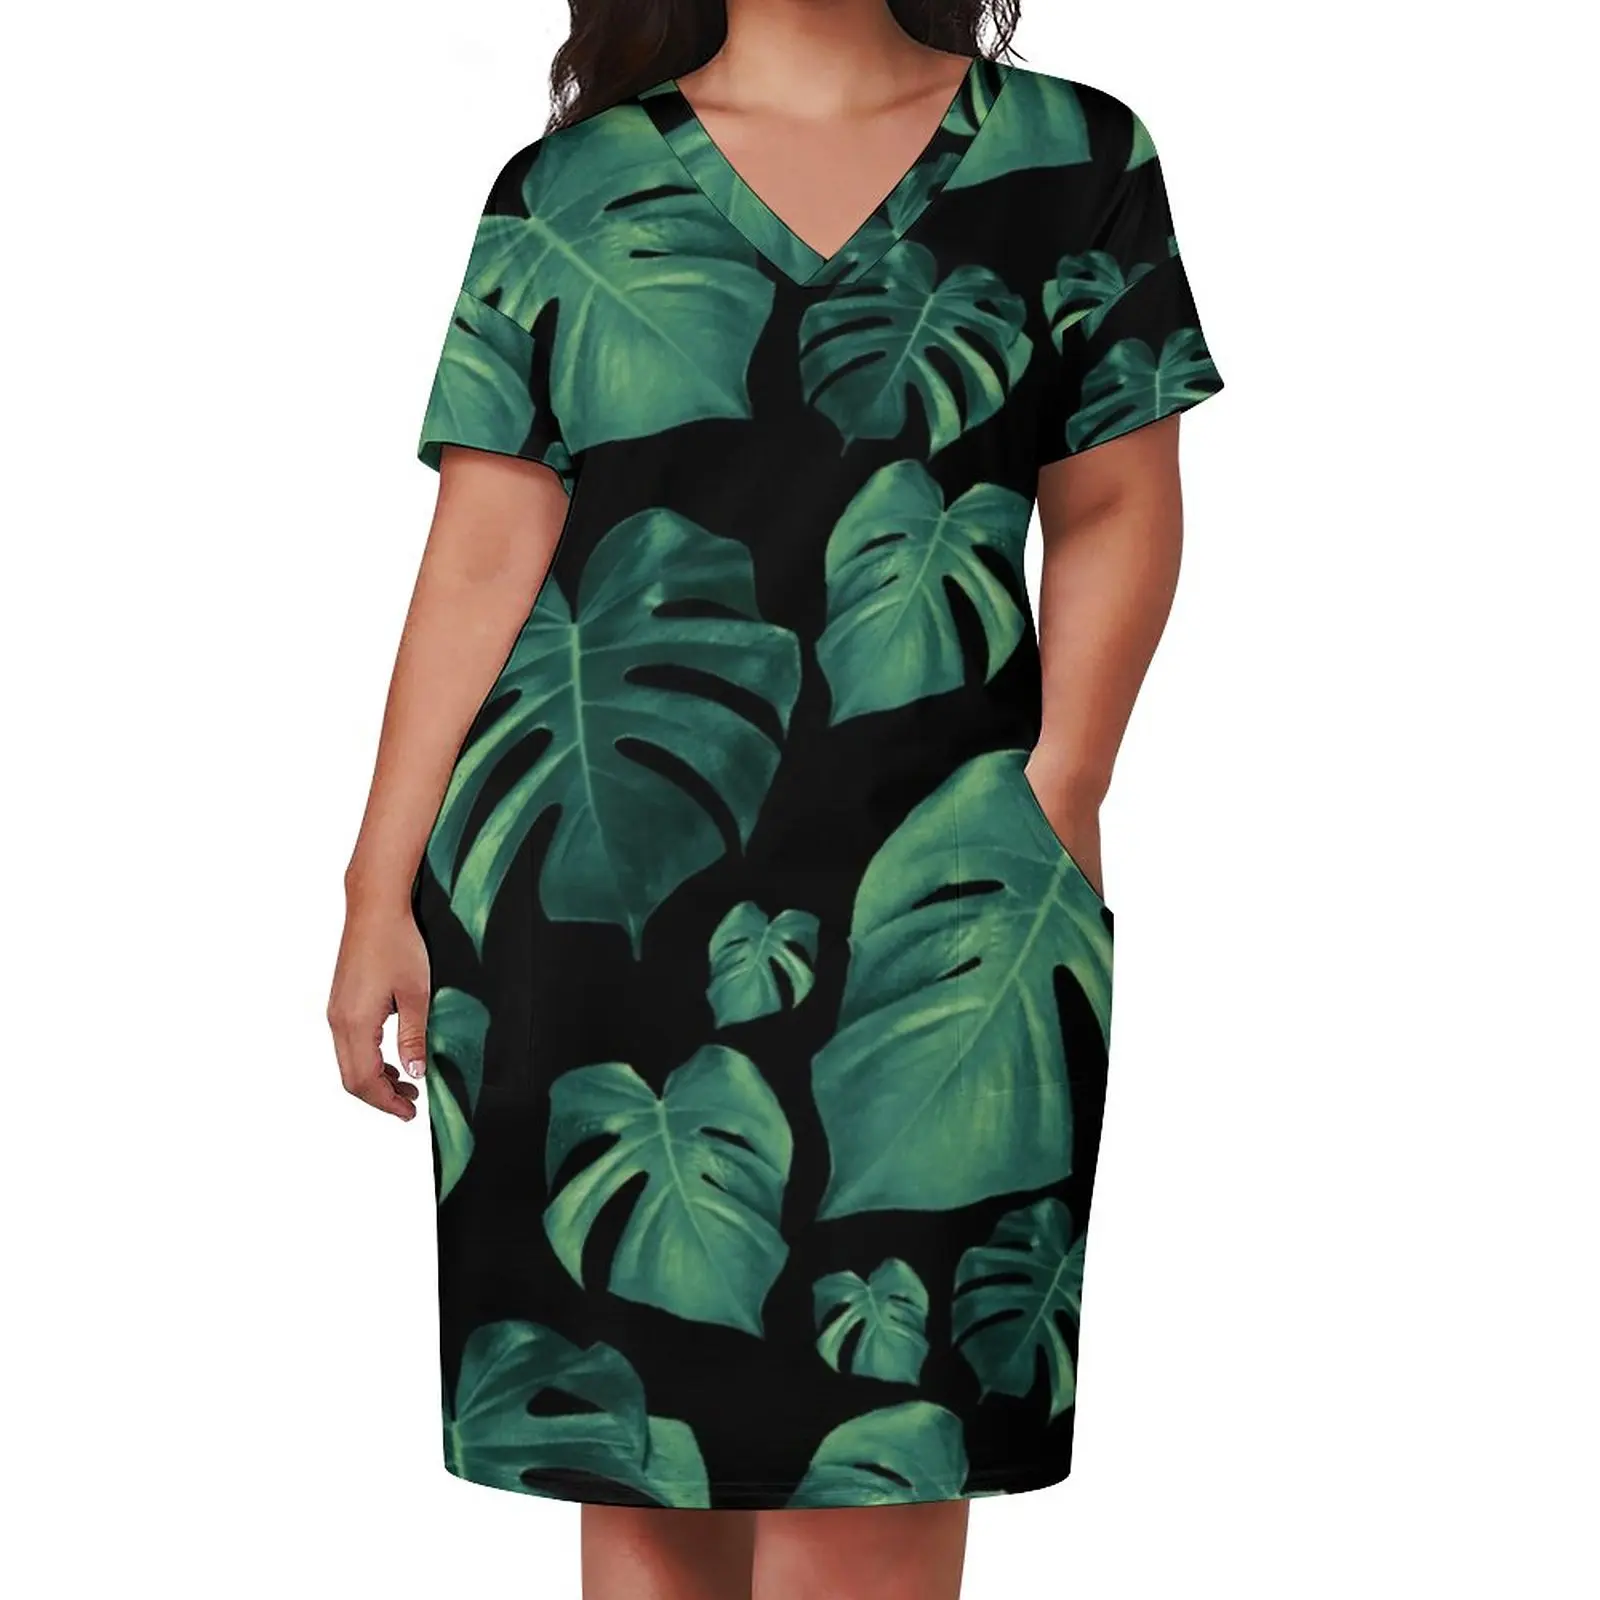 Tropical Monstera Dress V Neck Green Leaves Print Kawaii Dresses Street Fashion Graphic Casual Dress With Pockets Plus Size 5XL